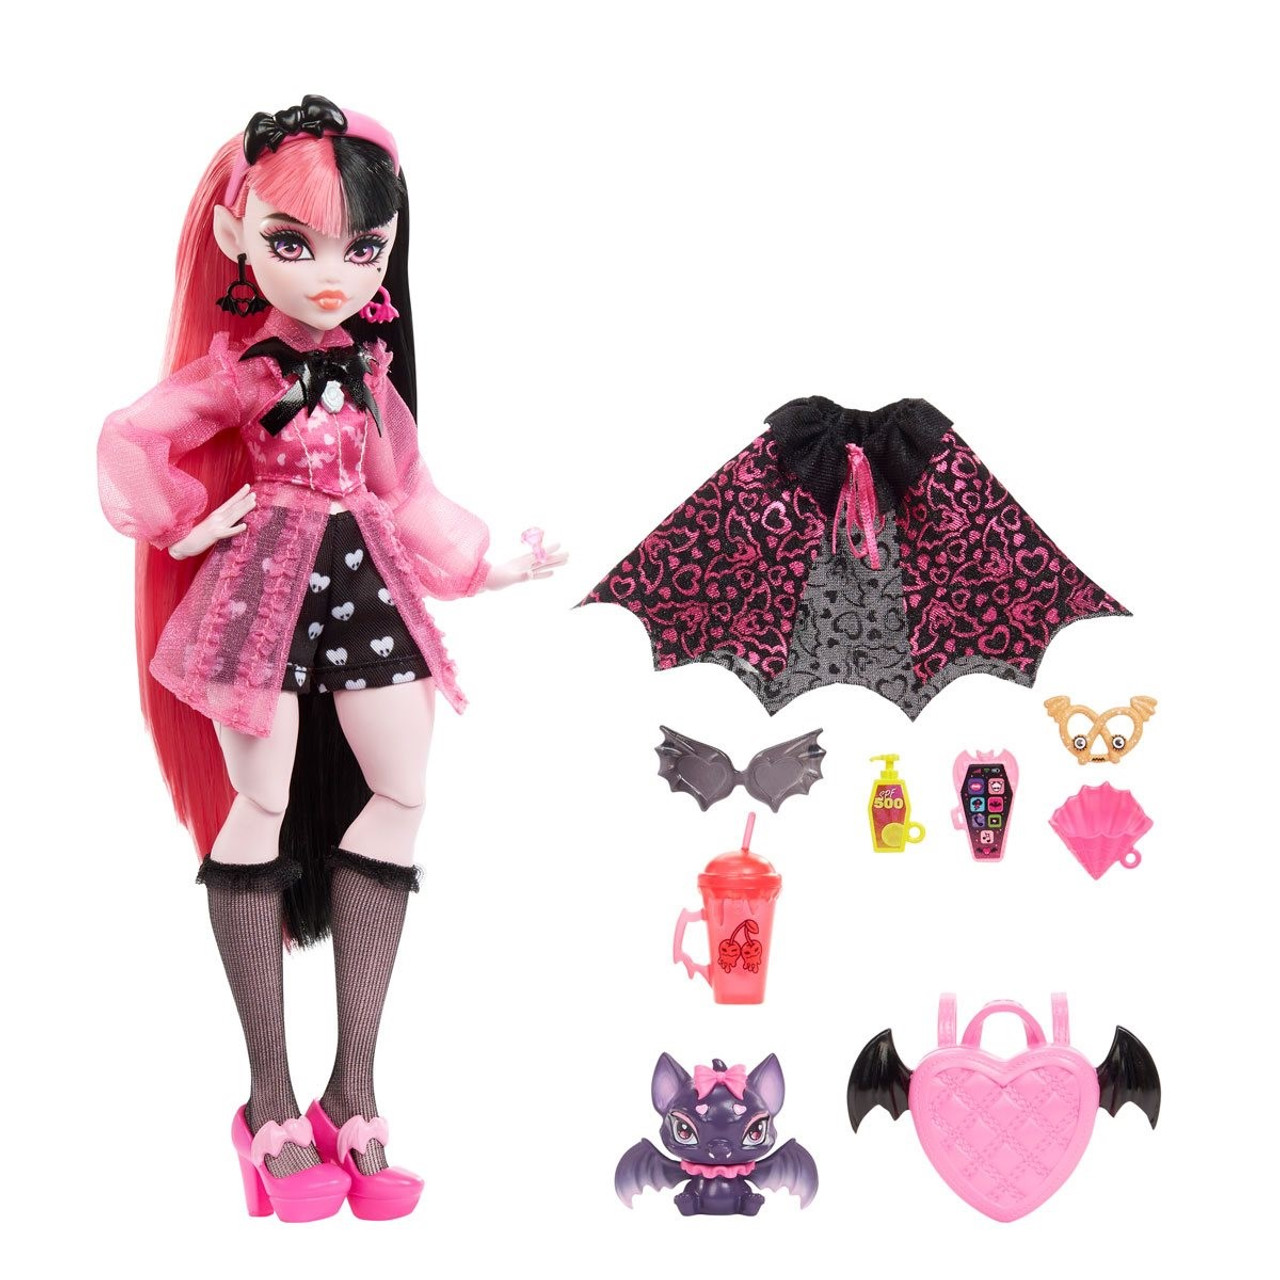 Draculaura wave 1 with pet Count Fabulous